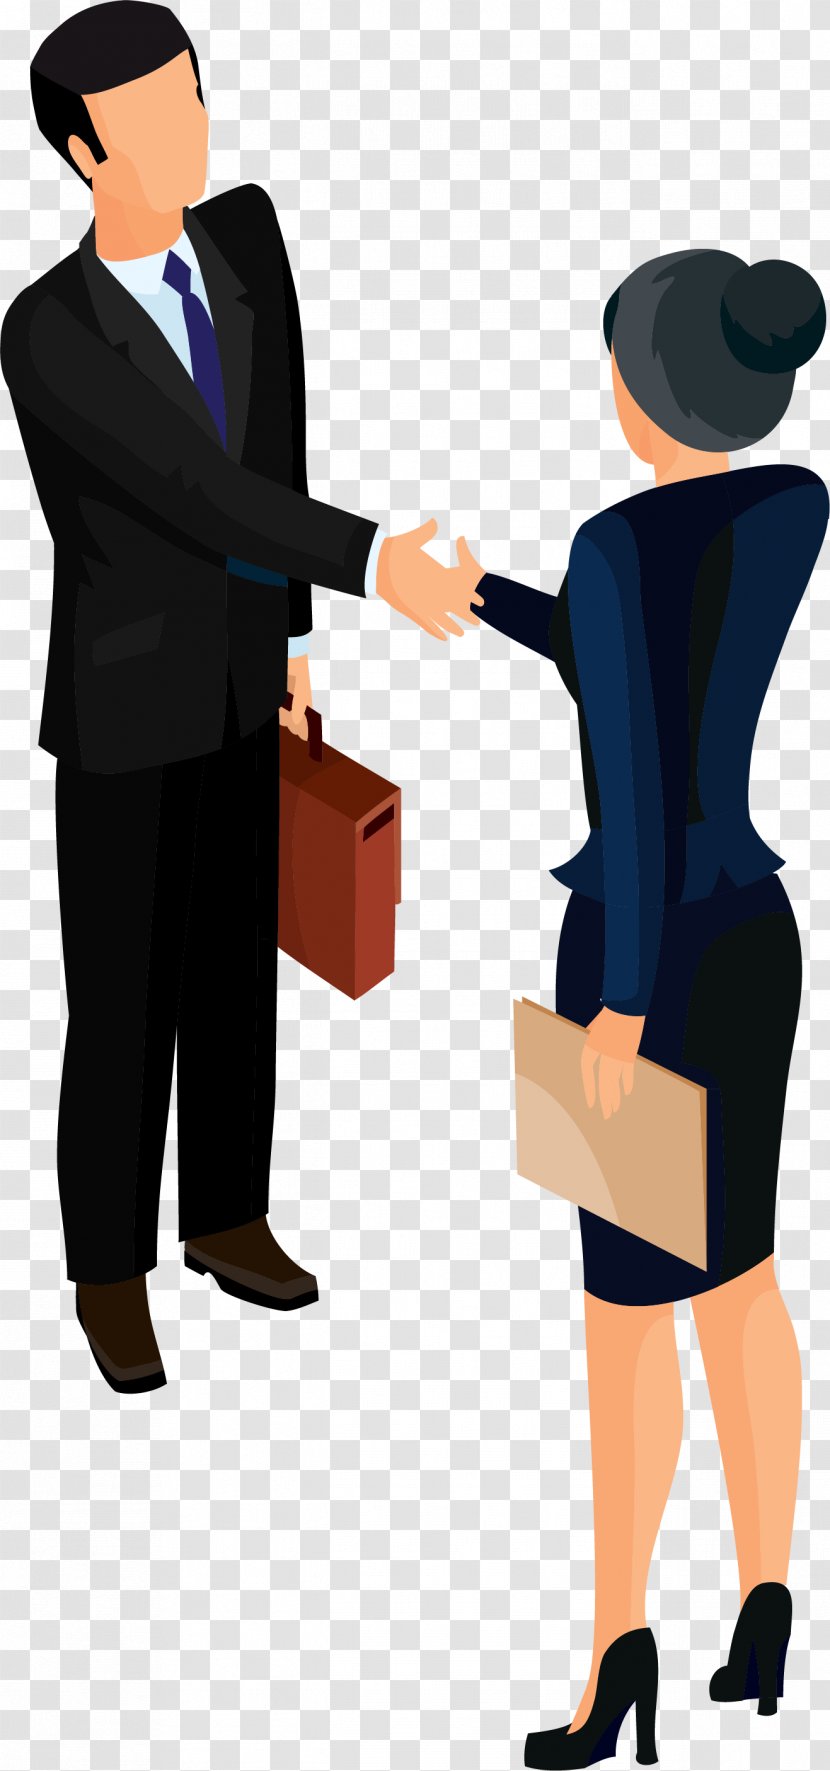 Businessperson Chess 2017 Illustration - Joint - Cartoon Business People Shake Hands Transparent PNG